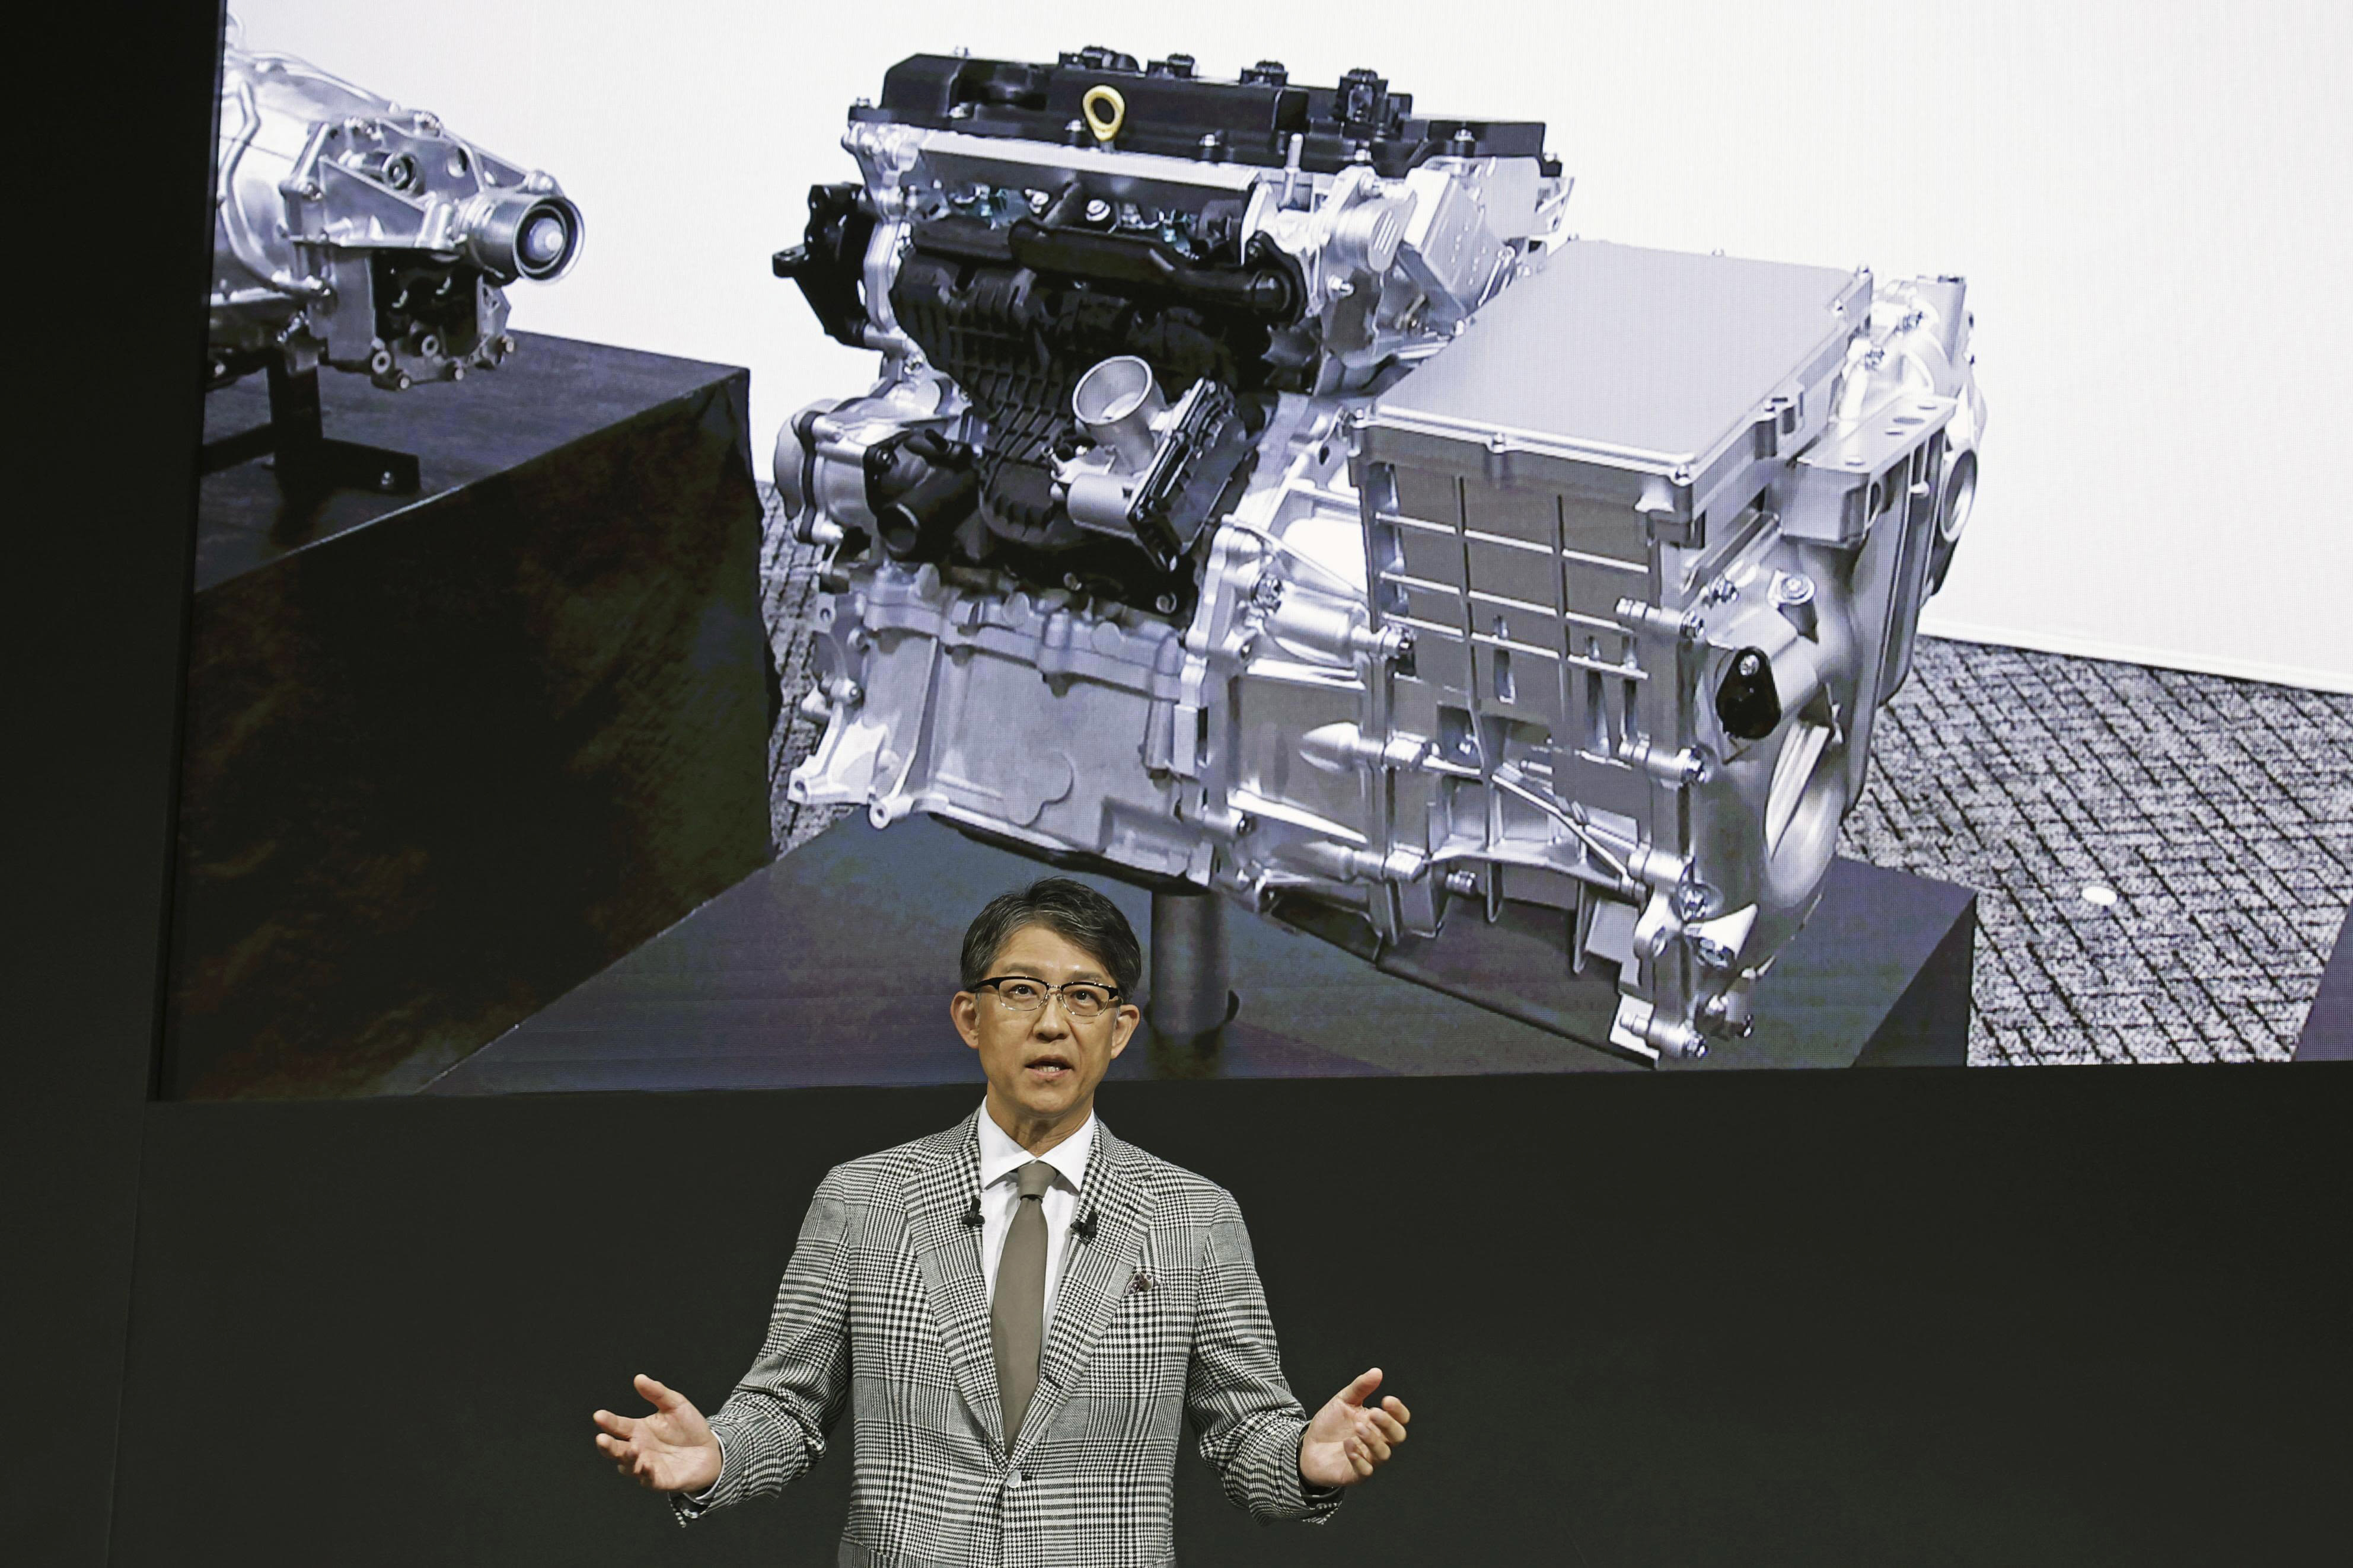 Japan's Toyota announces 'an engine born' with biofuel despite global push for battery electric cars